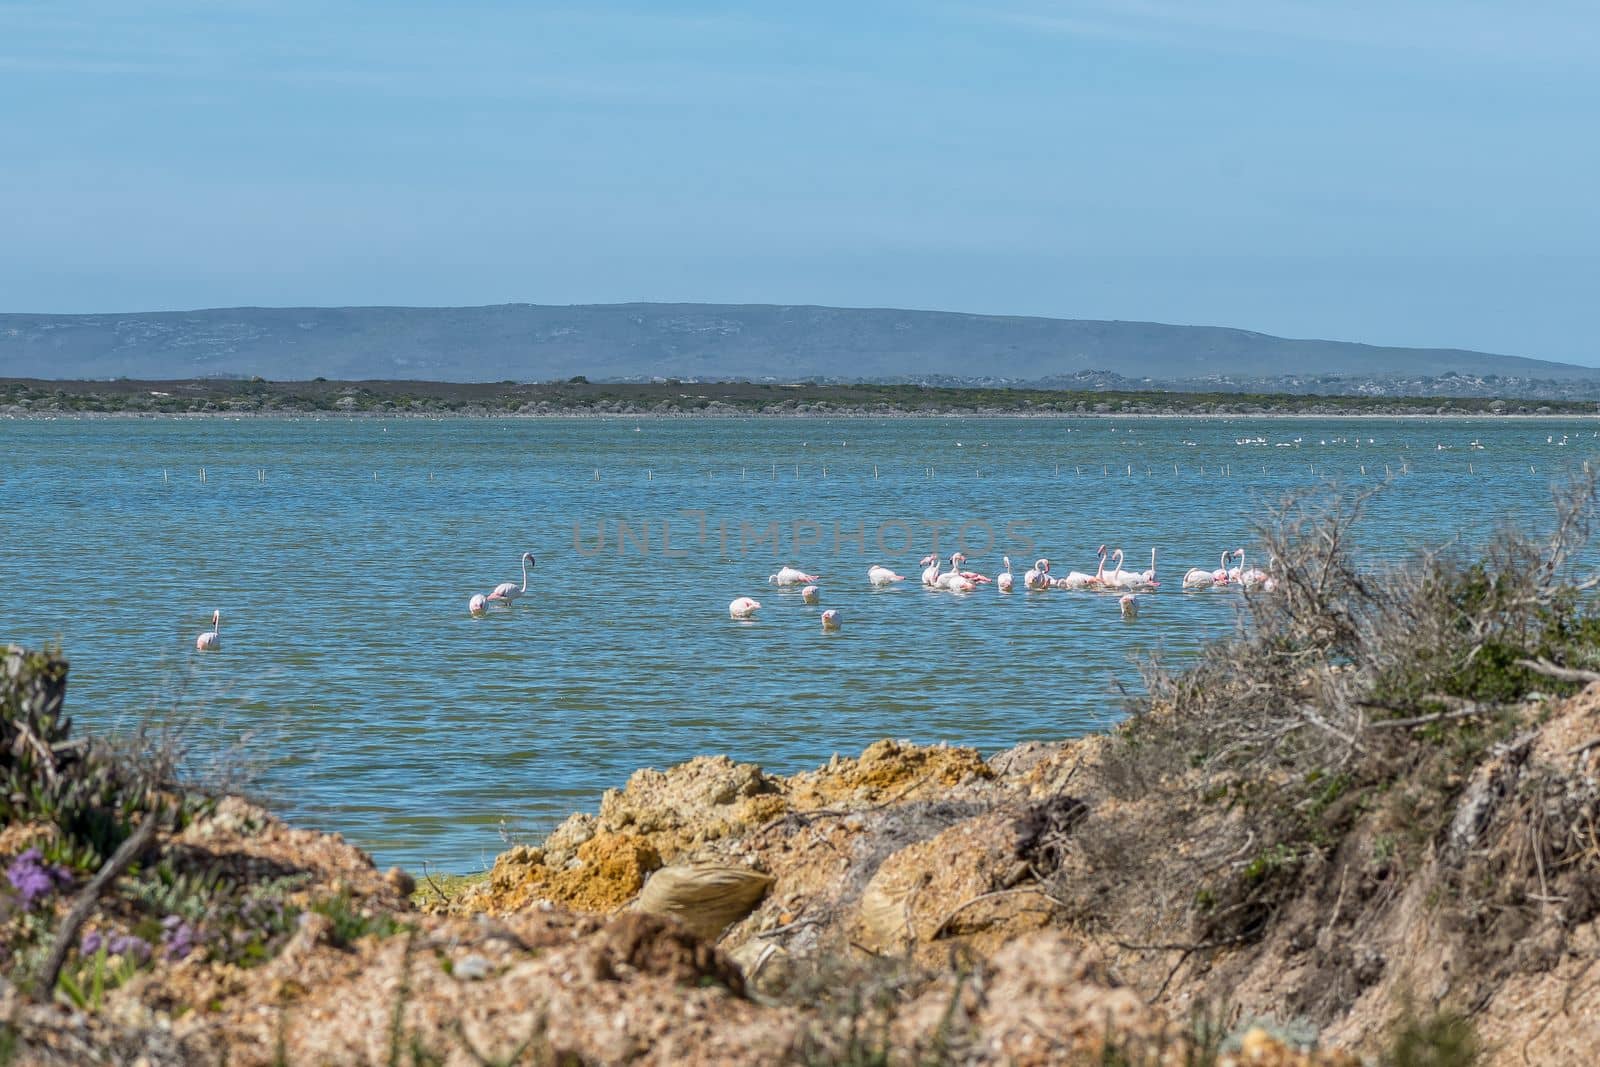 Greater flamingoes on Springfield saltpans in Agulhas National Park by dpreezg